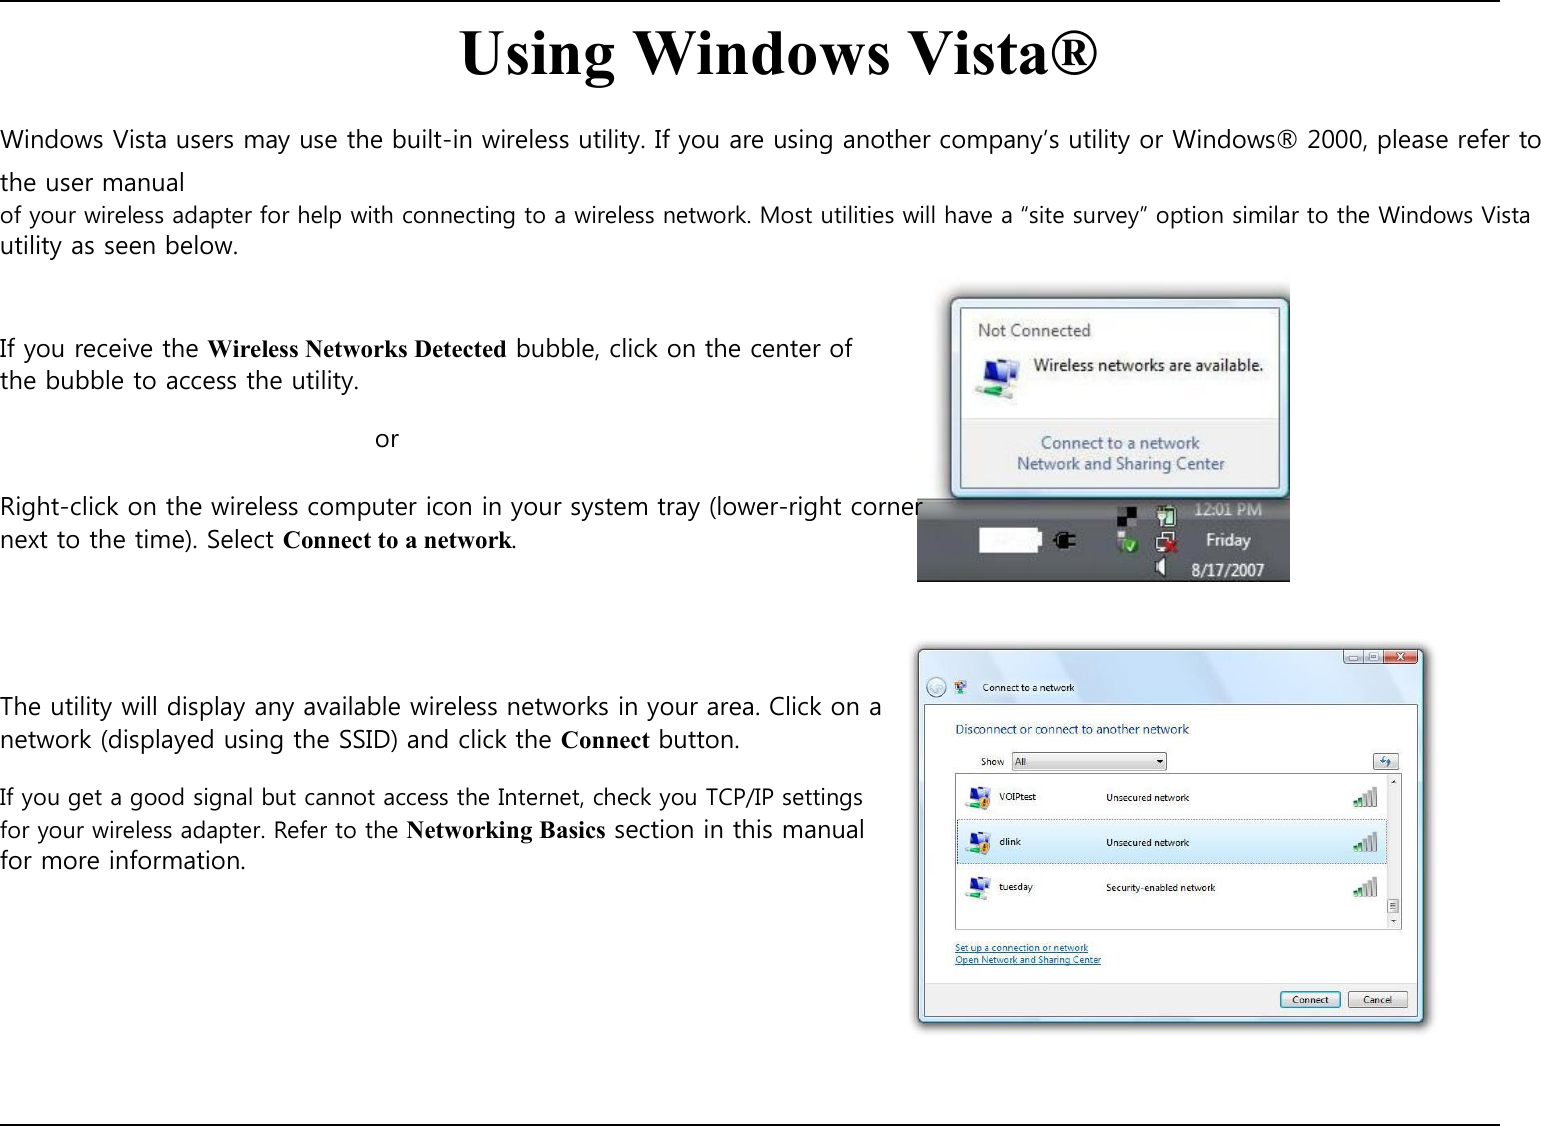   Using Windows Vista®  Windows Vista users may use the built-in wireless utility. If you are using another company’s utility or Windows® 2000, please refer to the user manual of your wireless adapter for help with connecting to a wireless network. Most utilities will have a “site survey” option similar to the Windows Vista utility as seen below.    If you receive the Wireless Networks Detected bubble, click on the center of the bubble to access the utility.  or  Right-click on the wireless computer icon in your system tray (lower-right corner next to the time). Select Connect to a network.       The utility will display any available wireless networks in your area. Click on a network (displayed using the SSID) and click the Connect button.  If you get a good signal but cannot access the Internet, check you TCP/IP settings for your wireless adapter. Refer to the Networking Basics section in this manual for more information.               